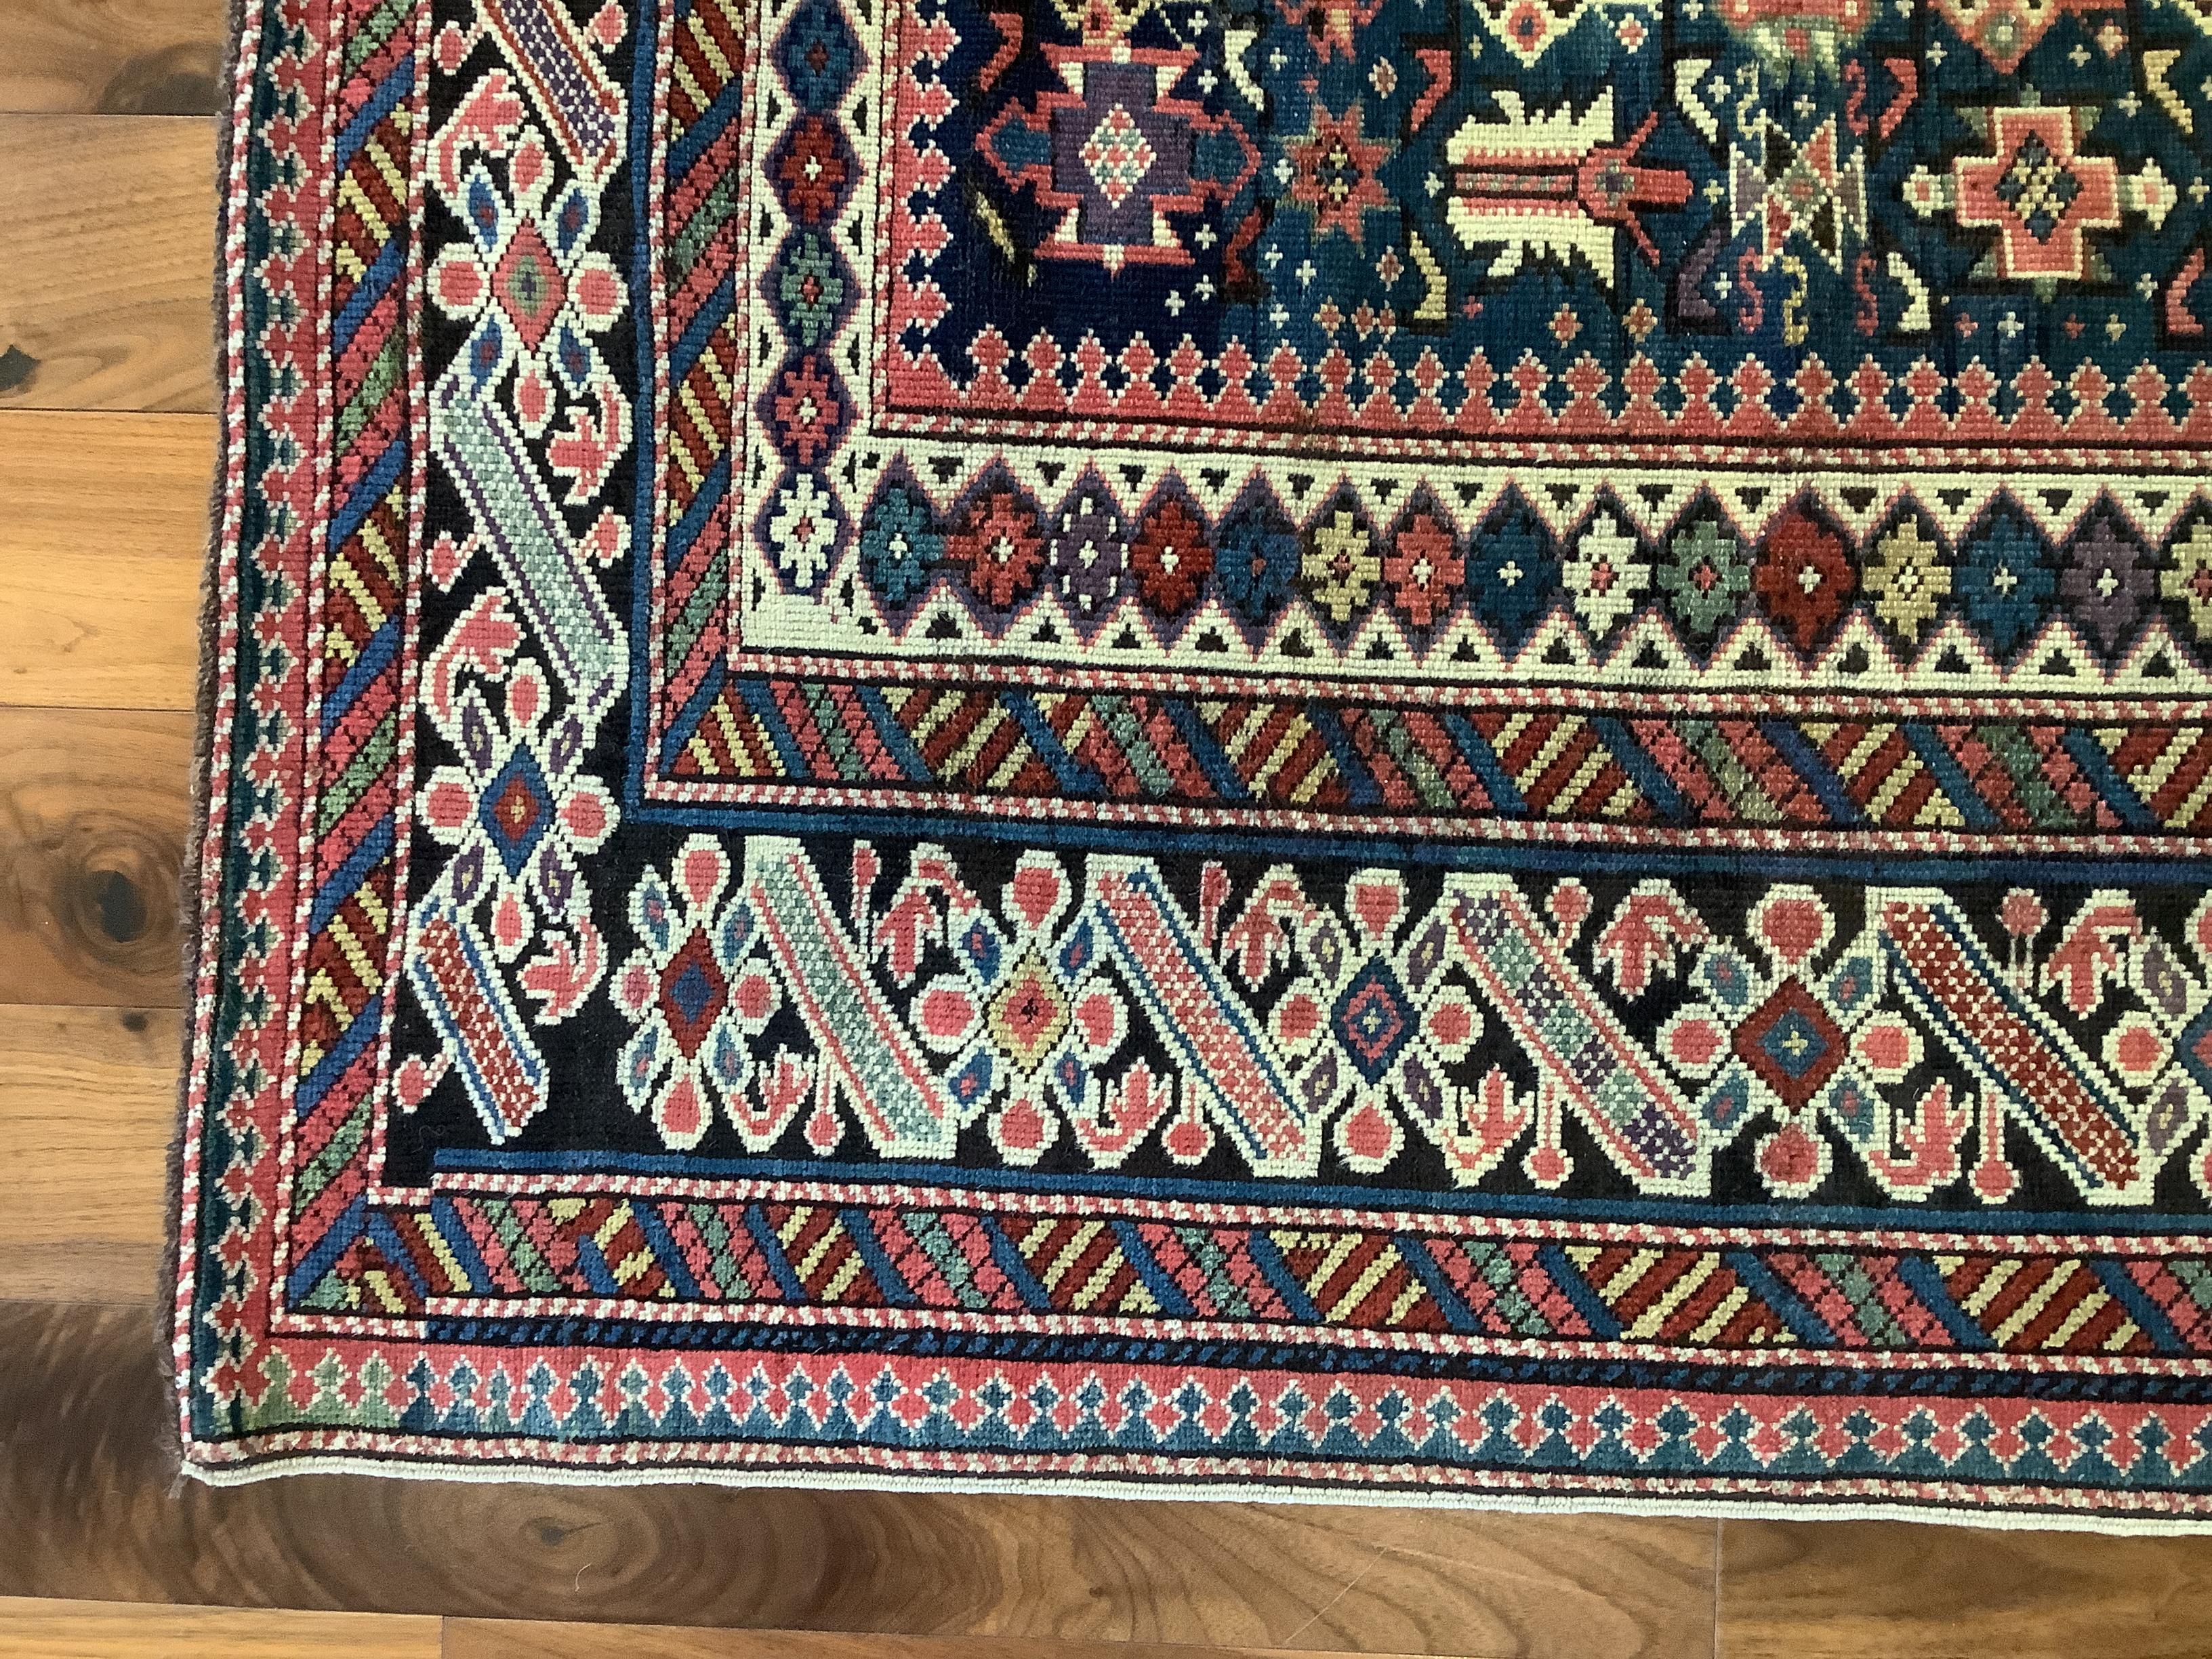 Chi Chi rugs, with their rich variety of small-format geometric motifs which hermetically cover the field and borders, are considered some of the most elaborate Caucasian weavings. The midnight green field of this piece is filled with an